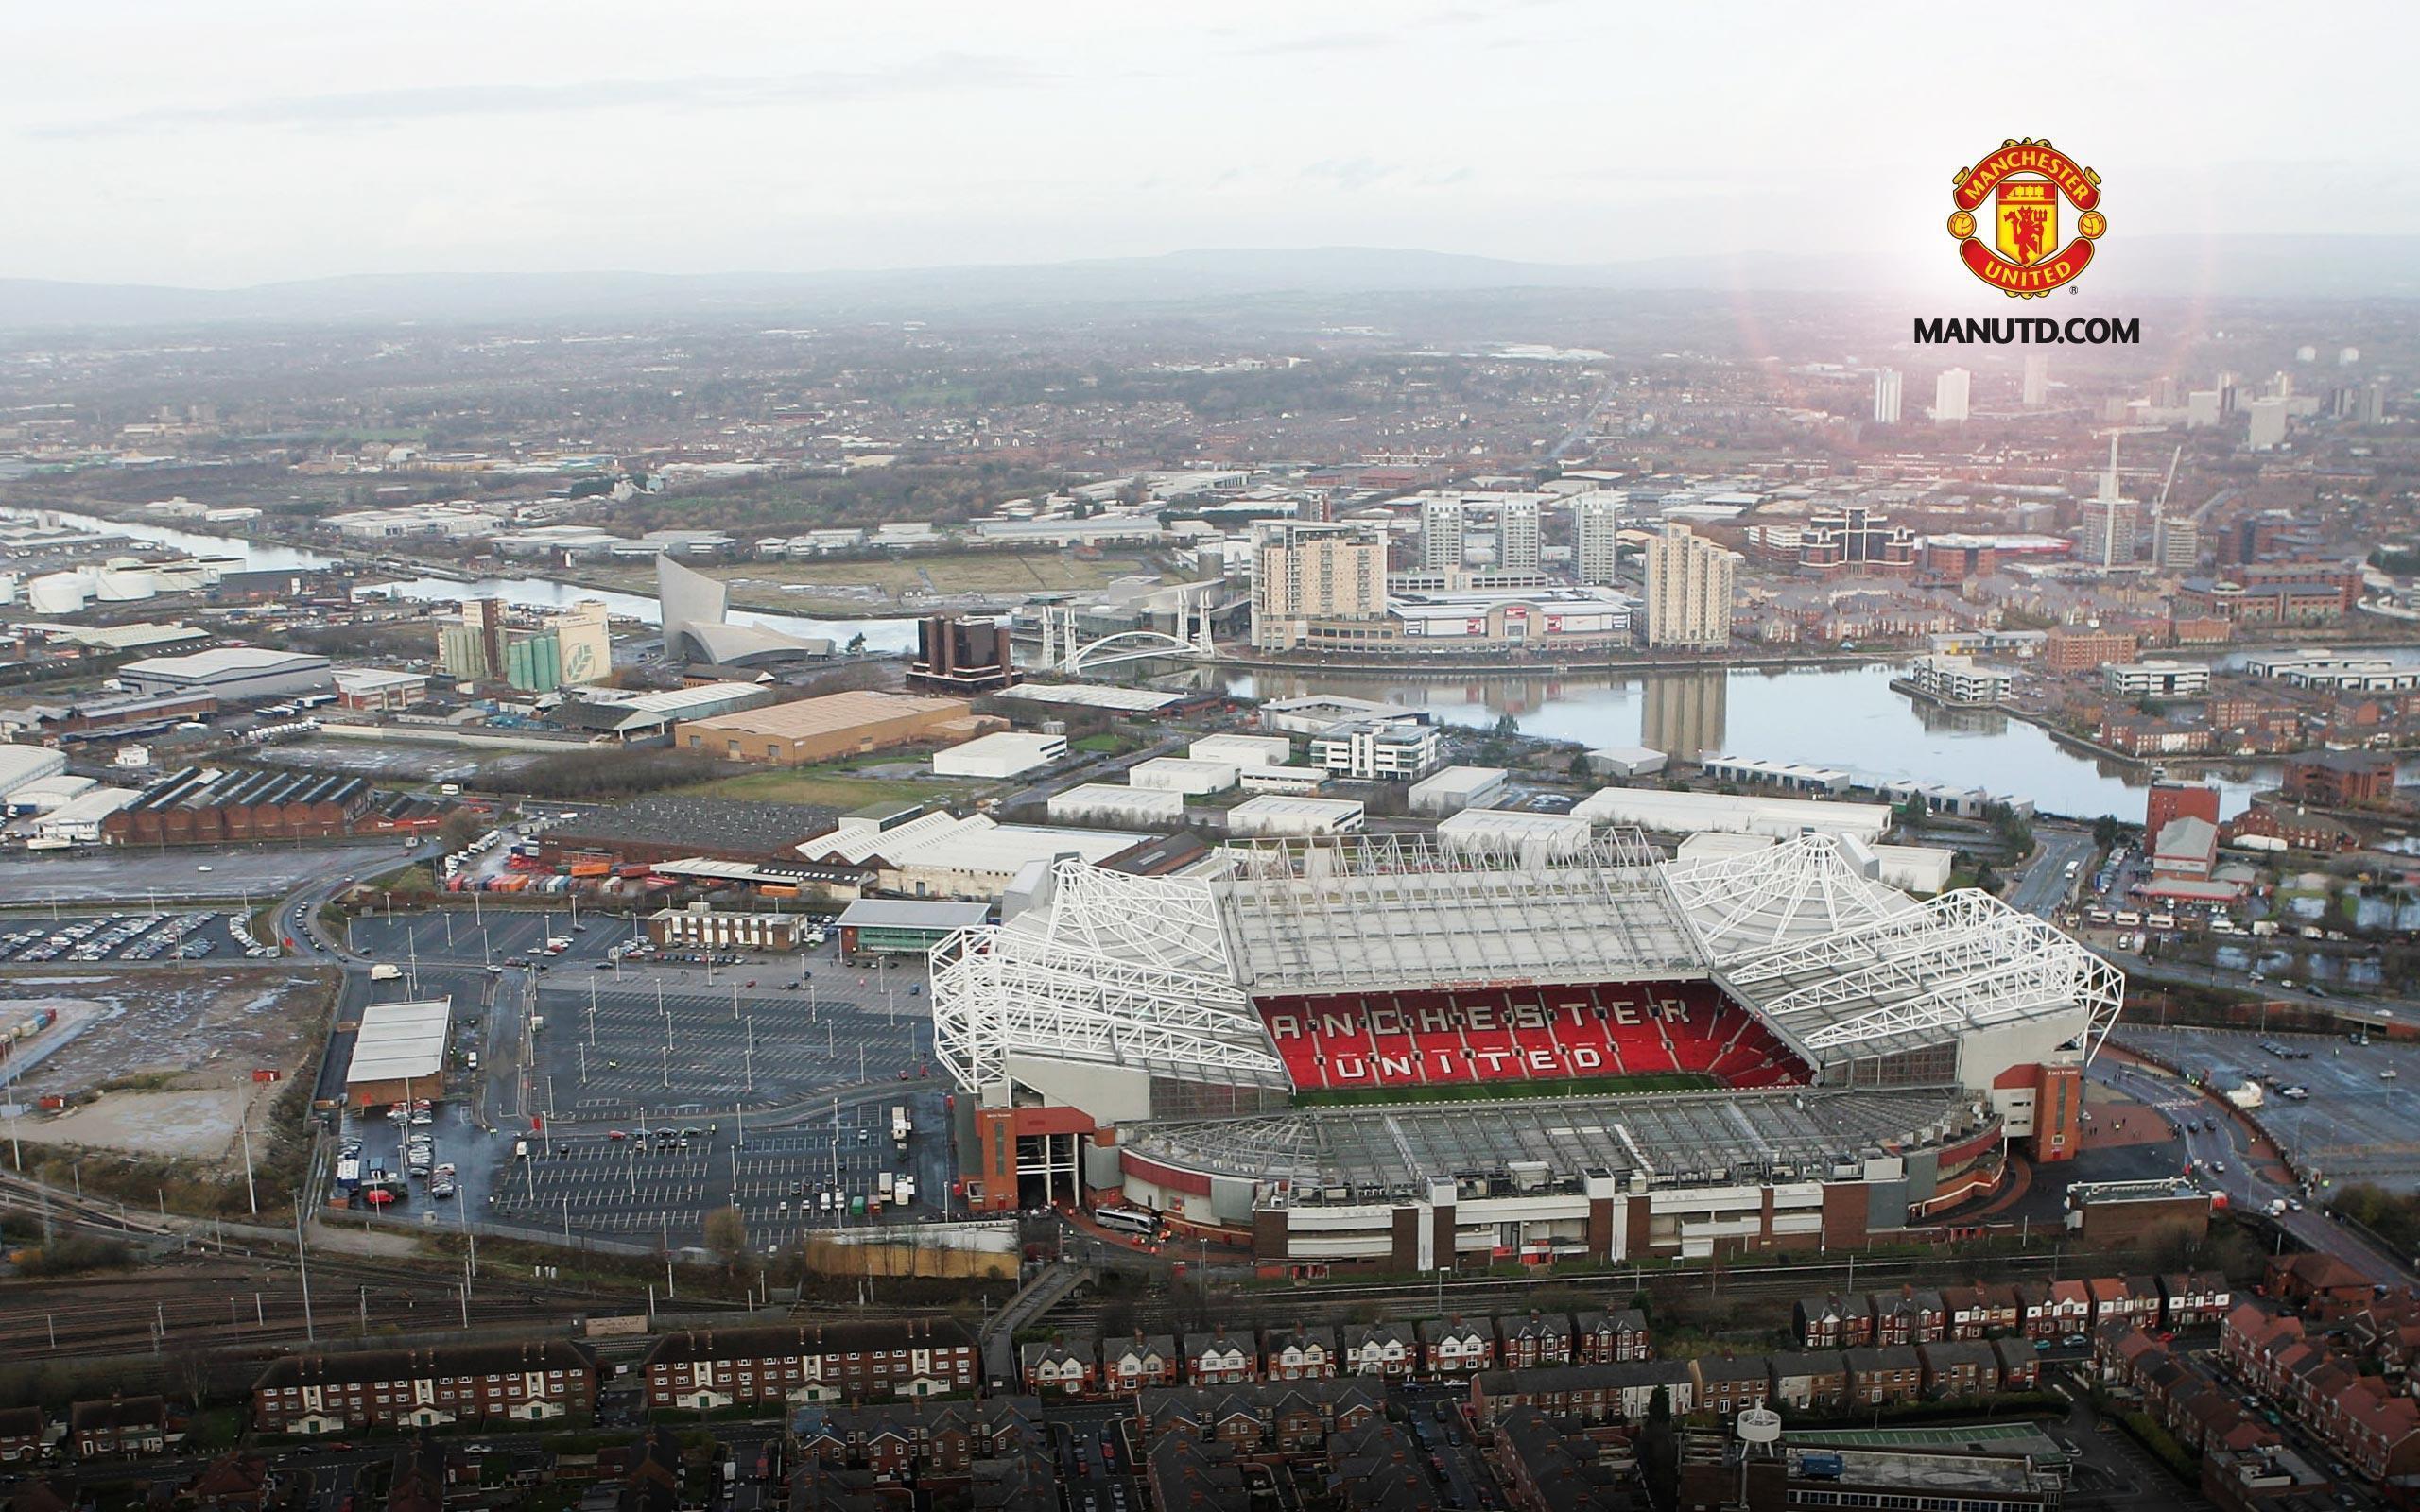 Old Trafford. Manchester United Wallpaper